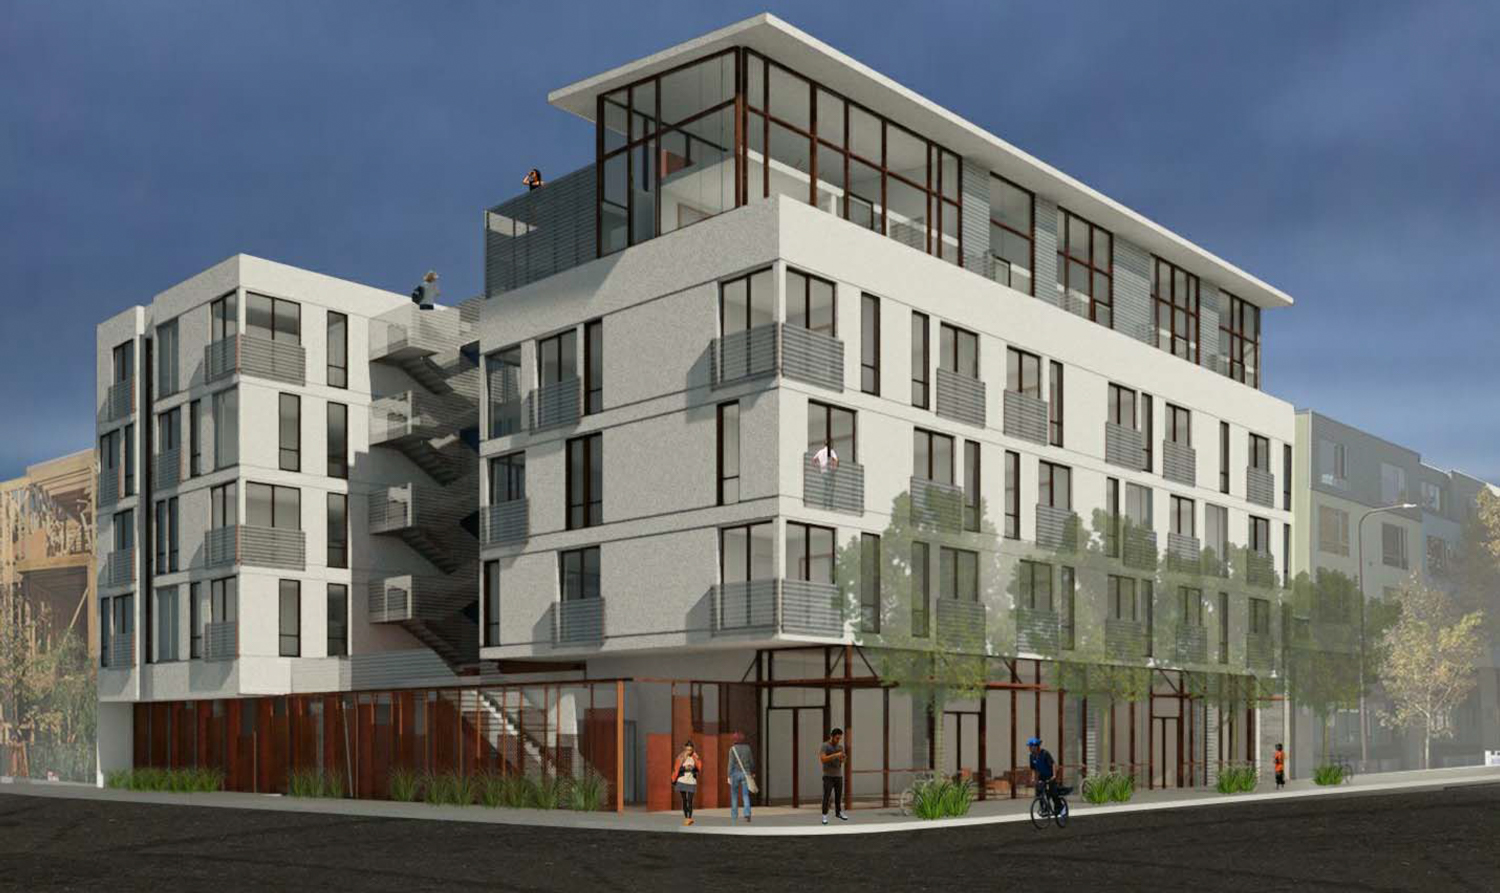 Outdated proposal for 2720 San Pablo Avenue, rendering by Devi Dutta Architecture